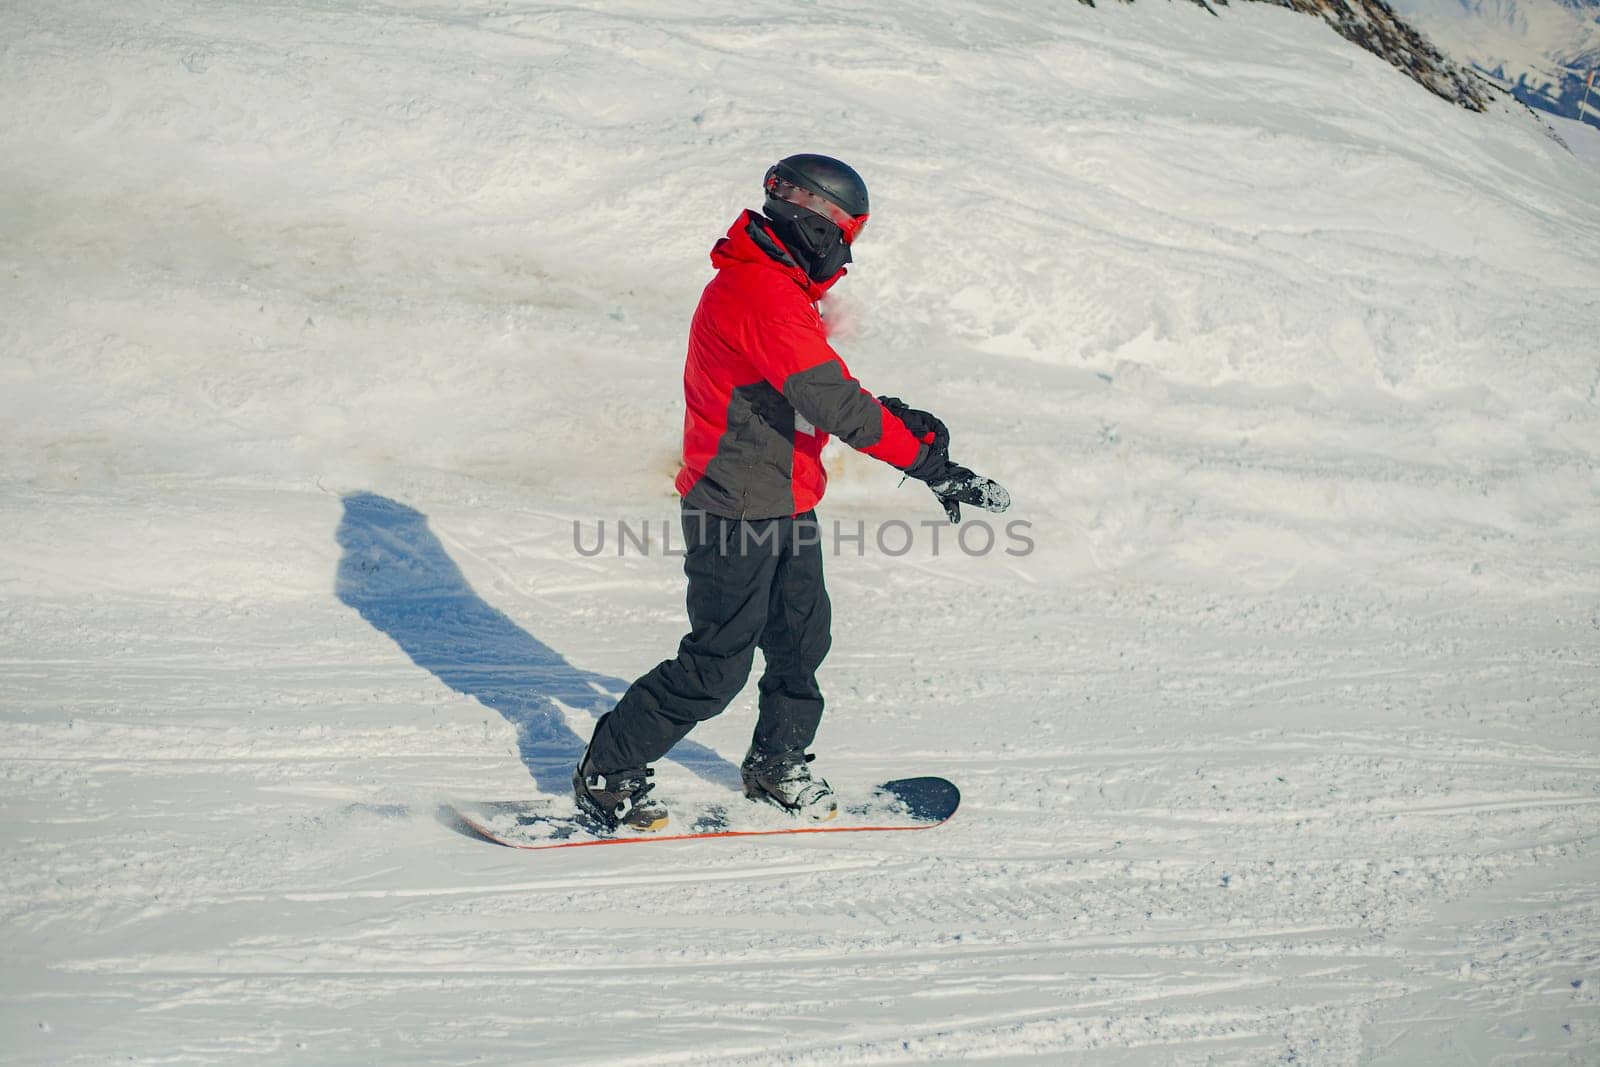 A snowboarder rides on a slope. Rest on the top of the mountain. Mountain ski resort. The guy is rolling down the mountain. Hobbies for young people.